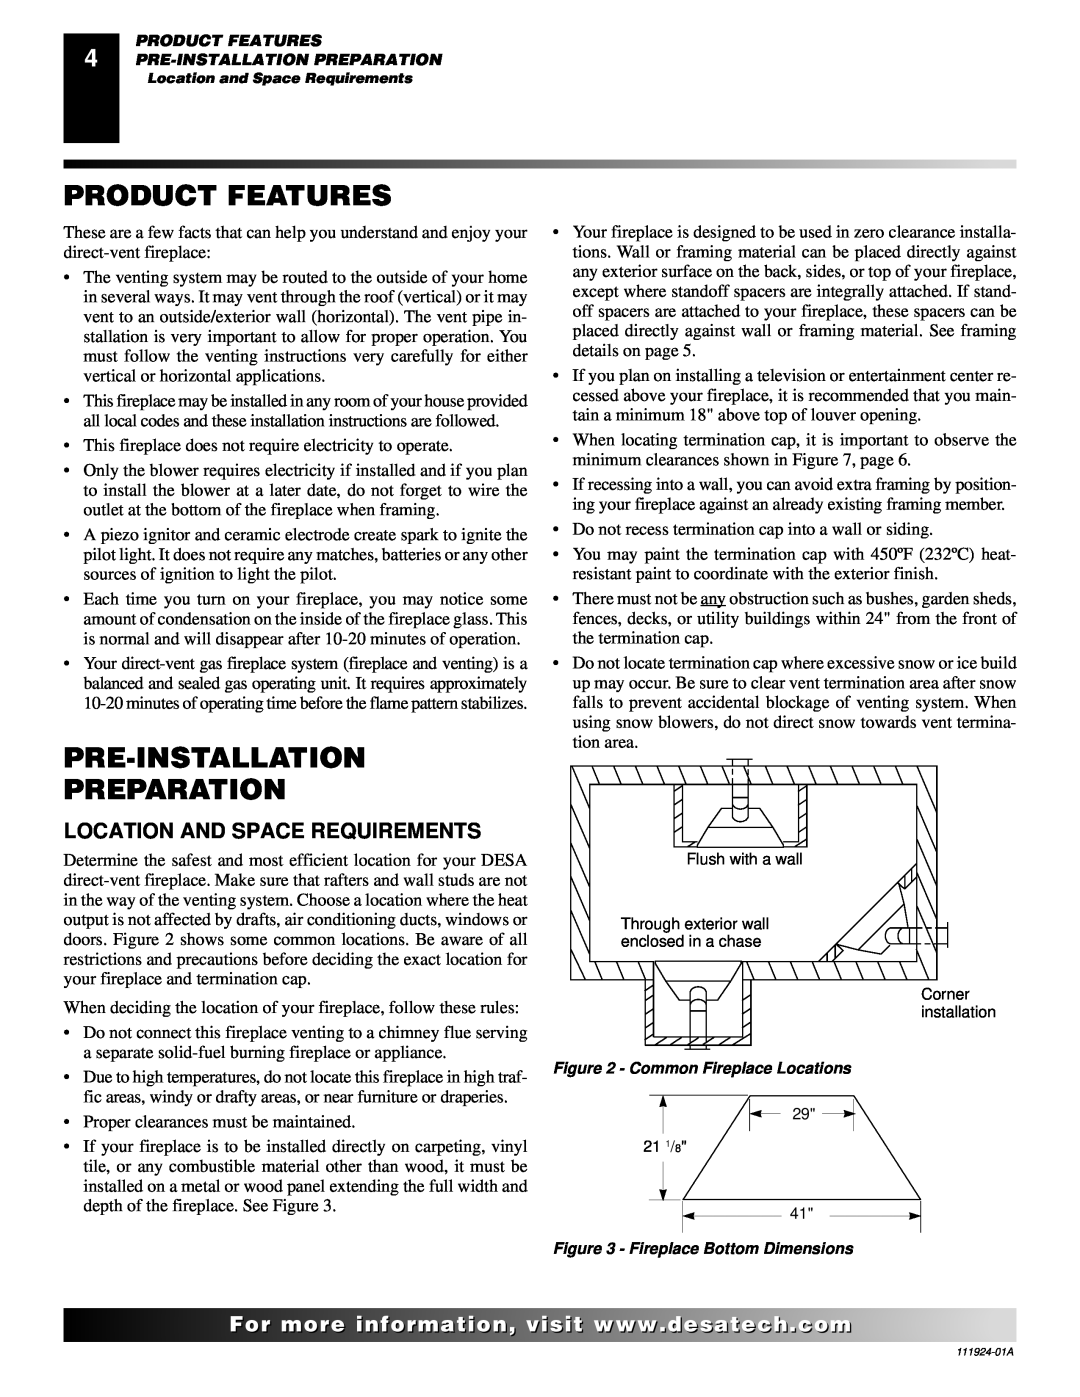 Desa K36EP, K36EN installation manual Product Features, Pre-Installation Preparation, Location And Space Requirements 